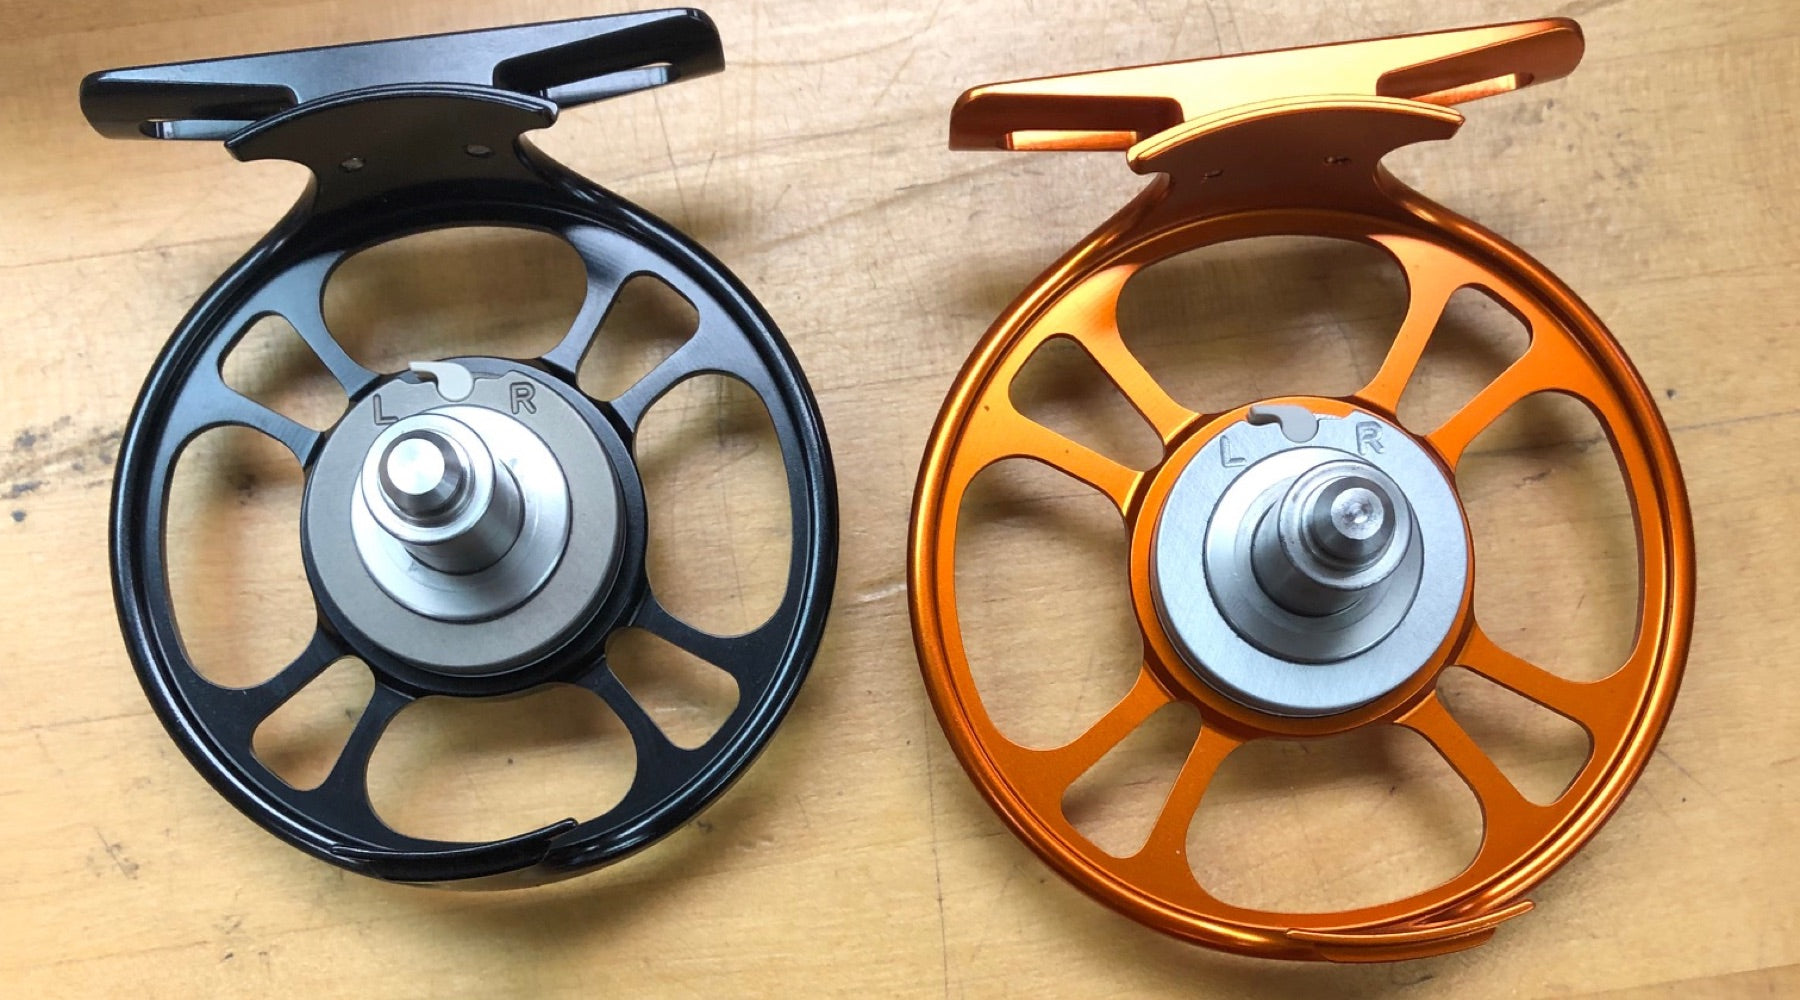 Gear Review: The Galvan Torque Fly Reel - The Compleat Angler